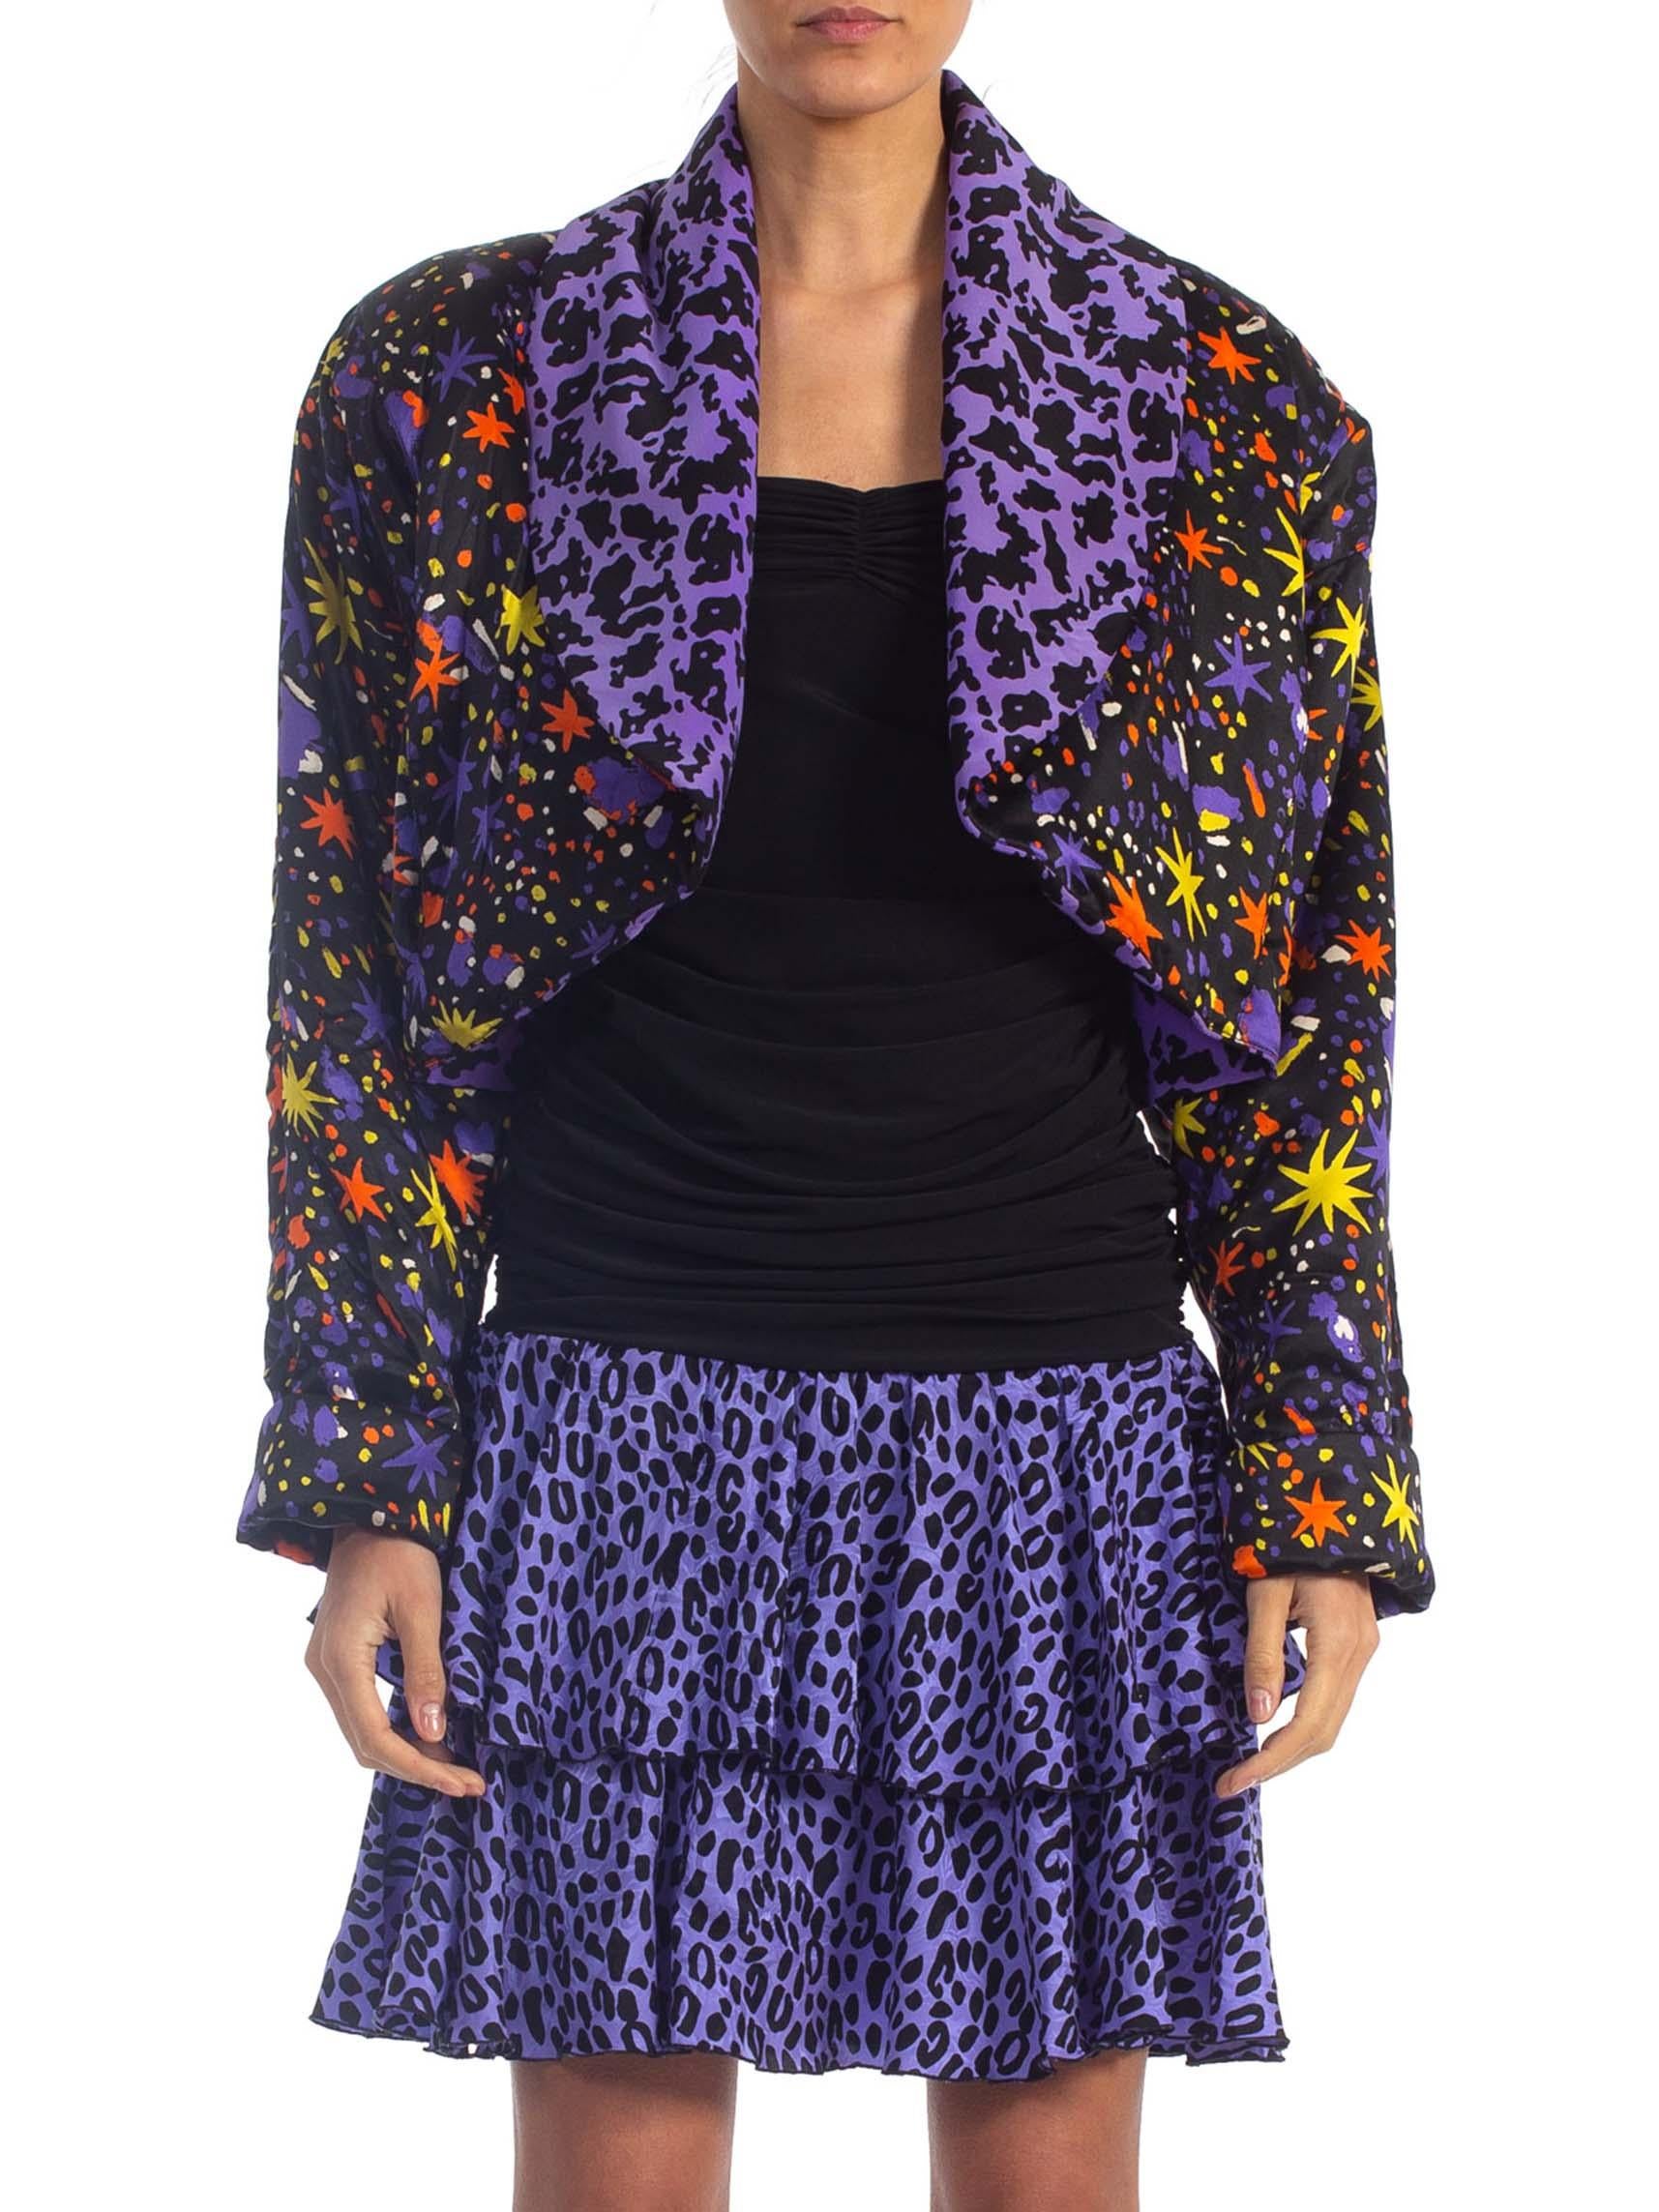 1980S Black & Purple Silk Stretch Body-Con Cocktail Dress With Epic Giant Shoulder Pad Jacket